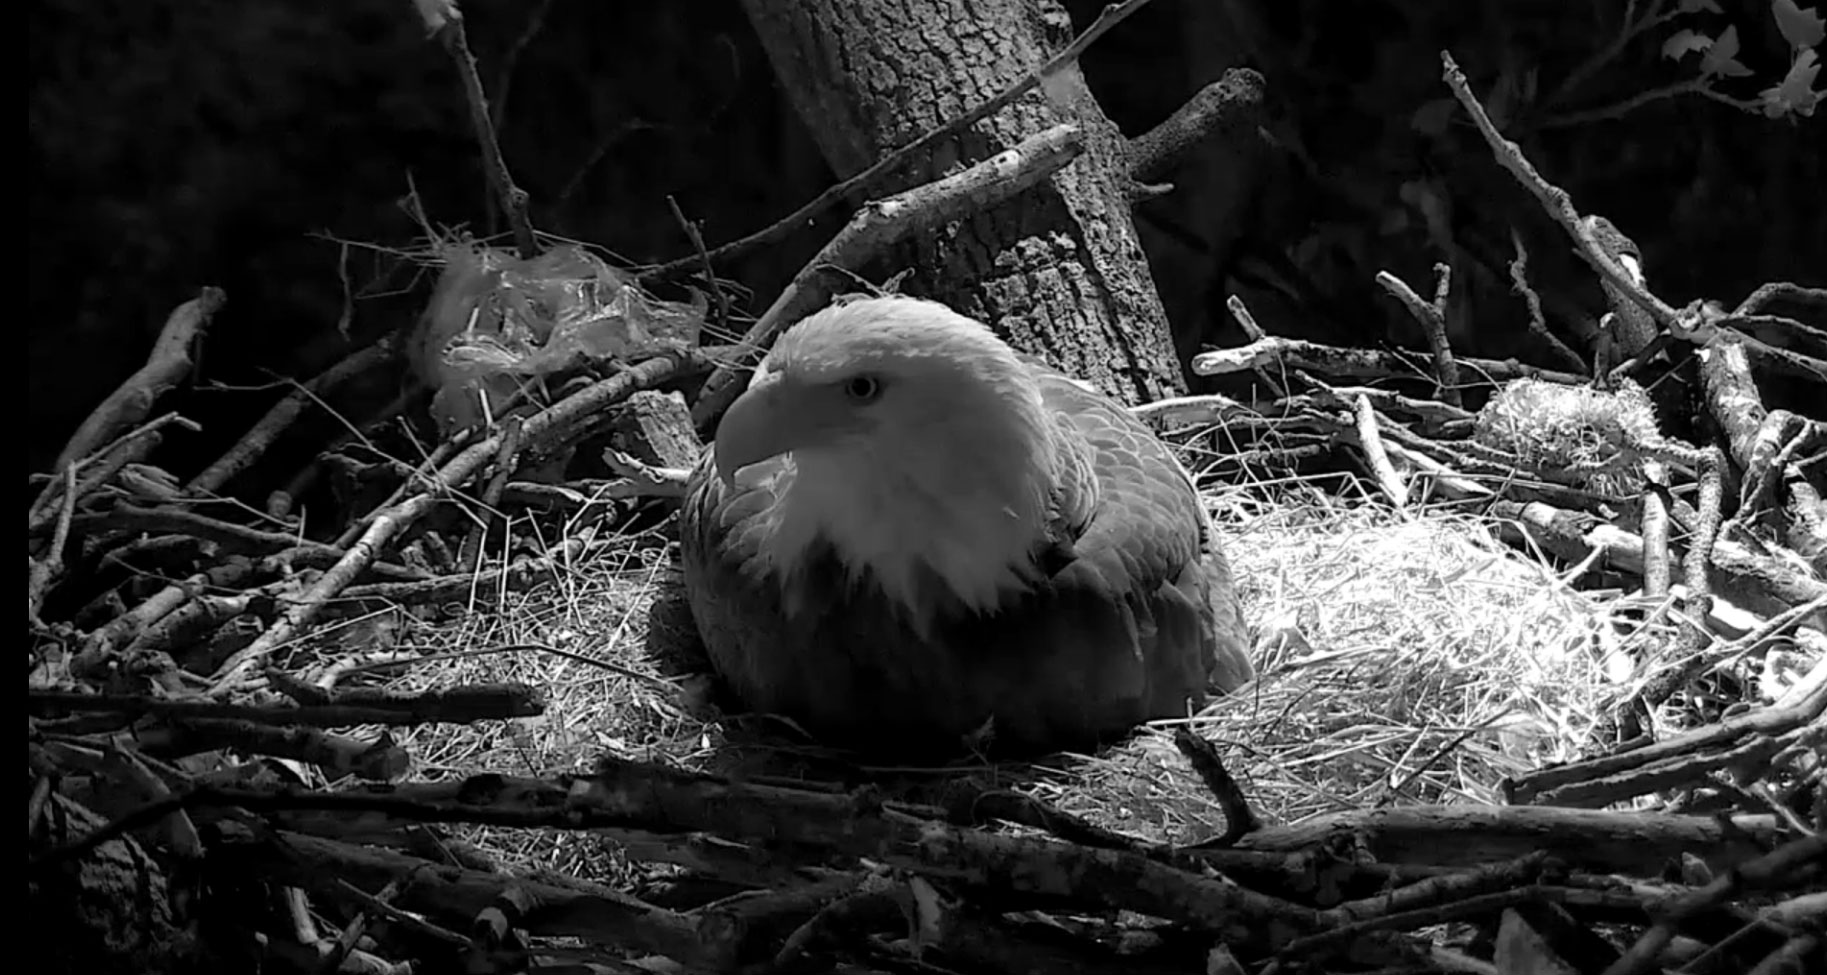 A bald eagle keeps watch over the nest shortly before 7 a.m. on March 17, 2016. (© 2016 American Eagle Foundation, EAGLES.ORG.)